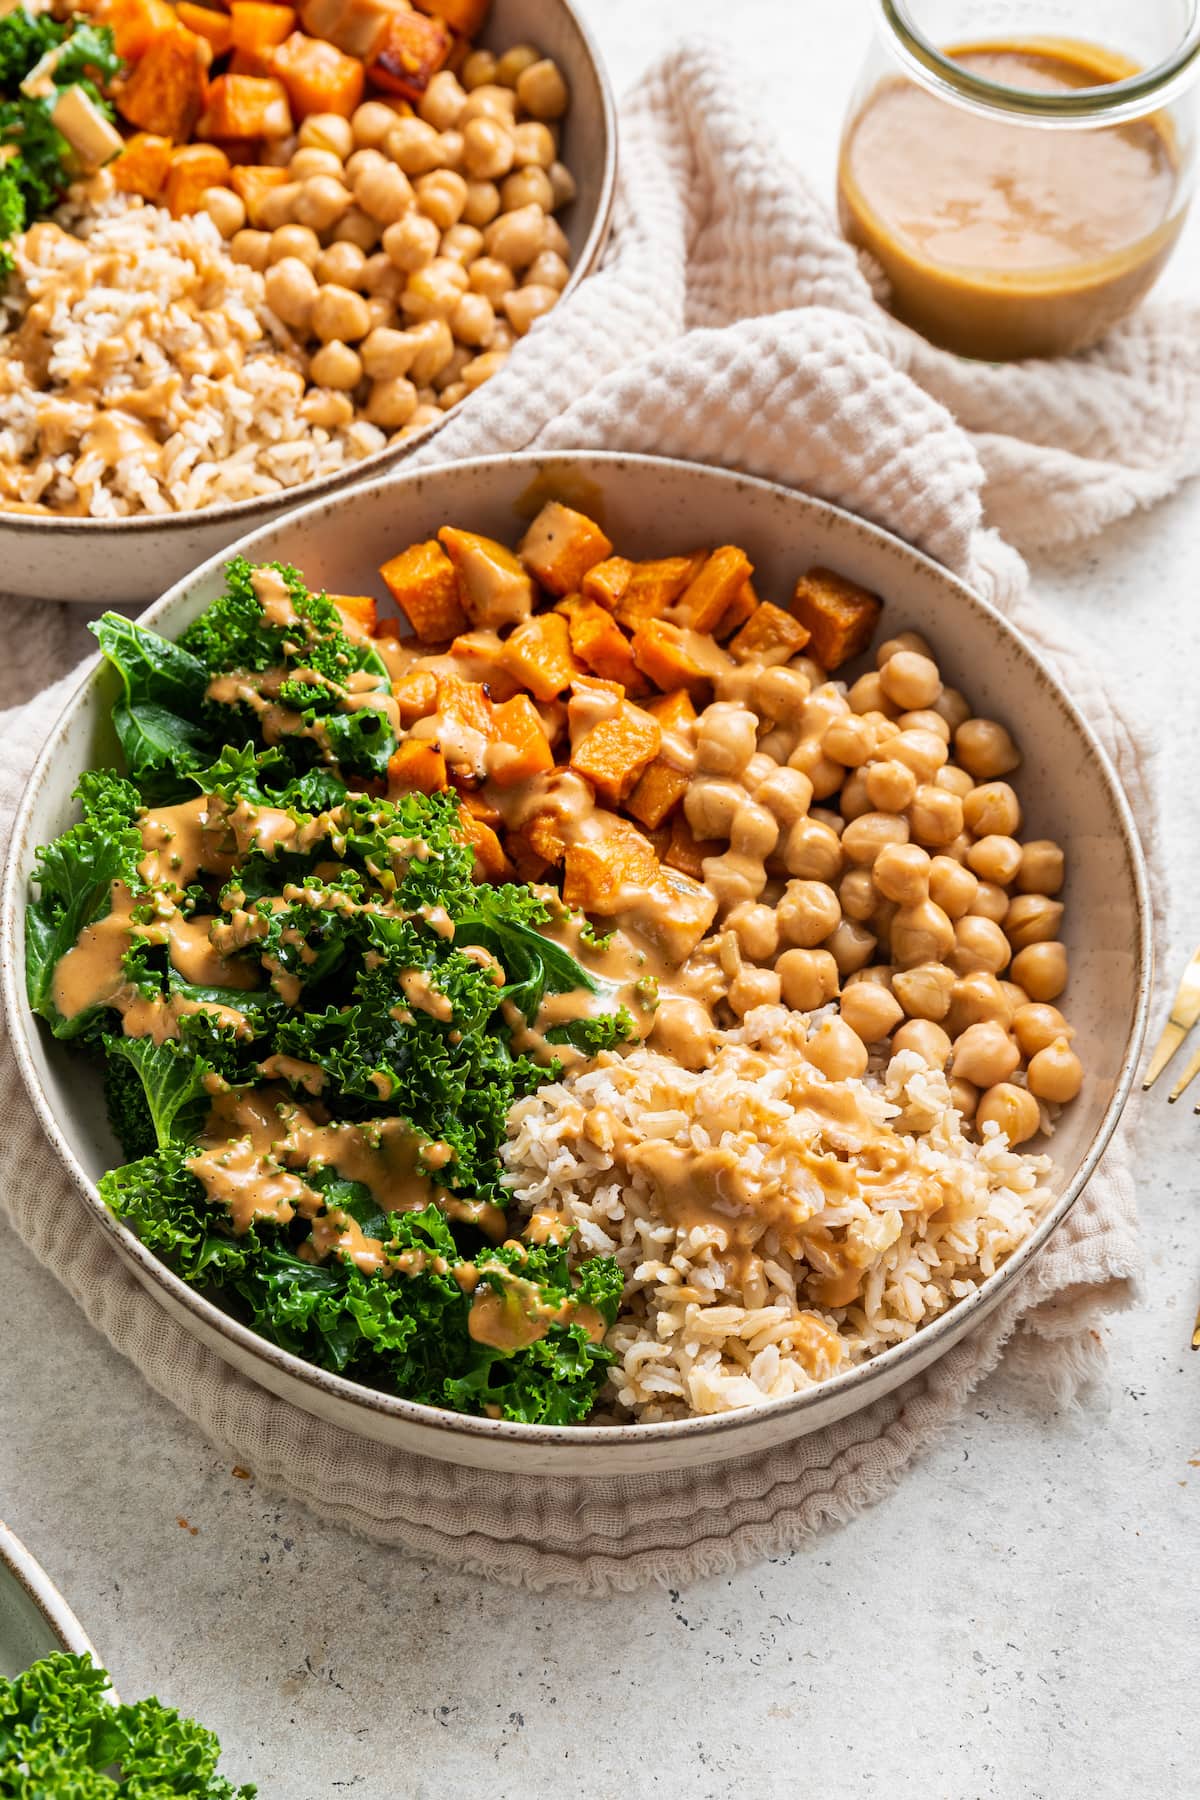 A white bowl containing kale, sweet potato, chickpeas, brown rice, and a creamy peanut sauce.